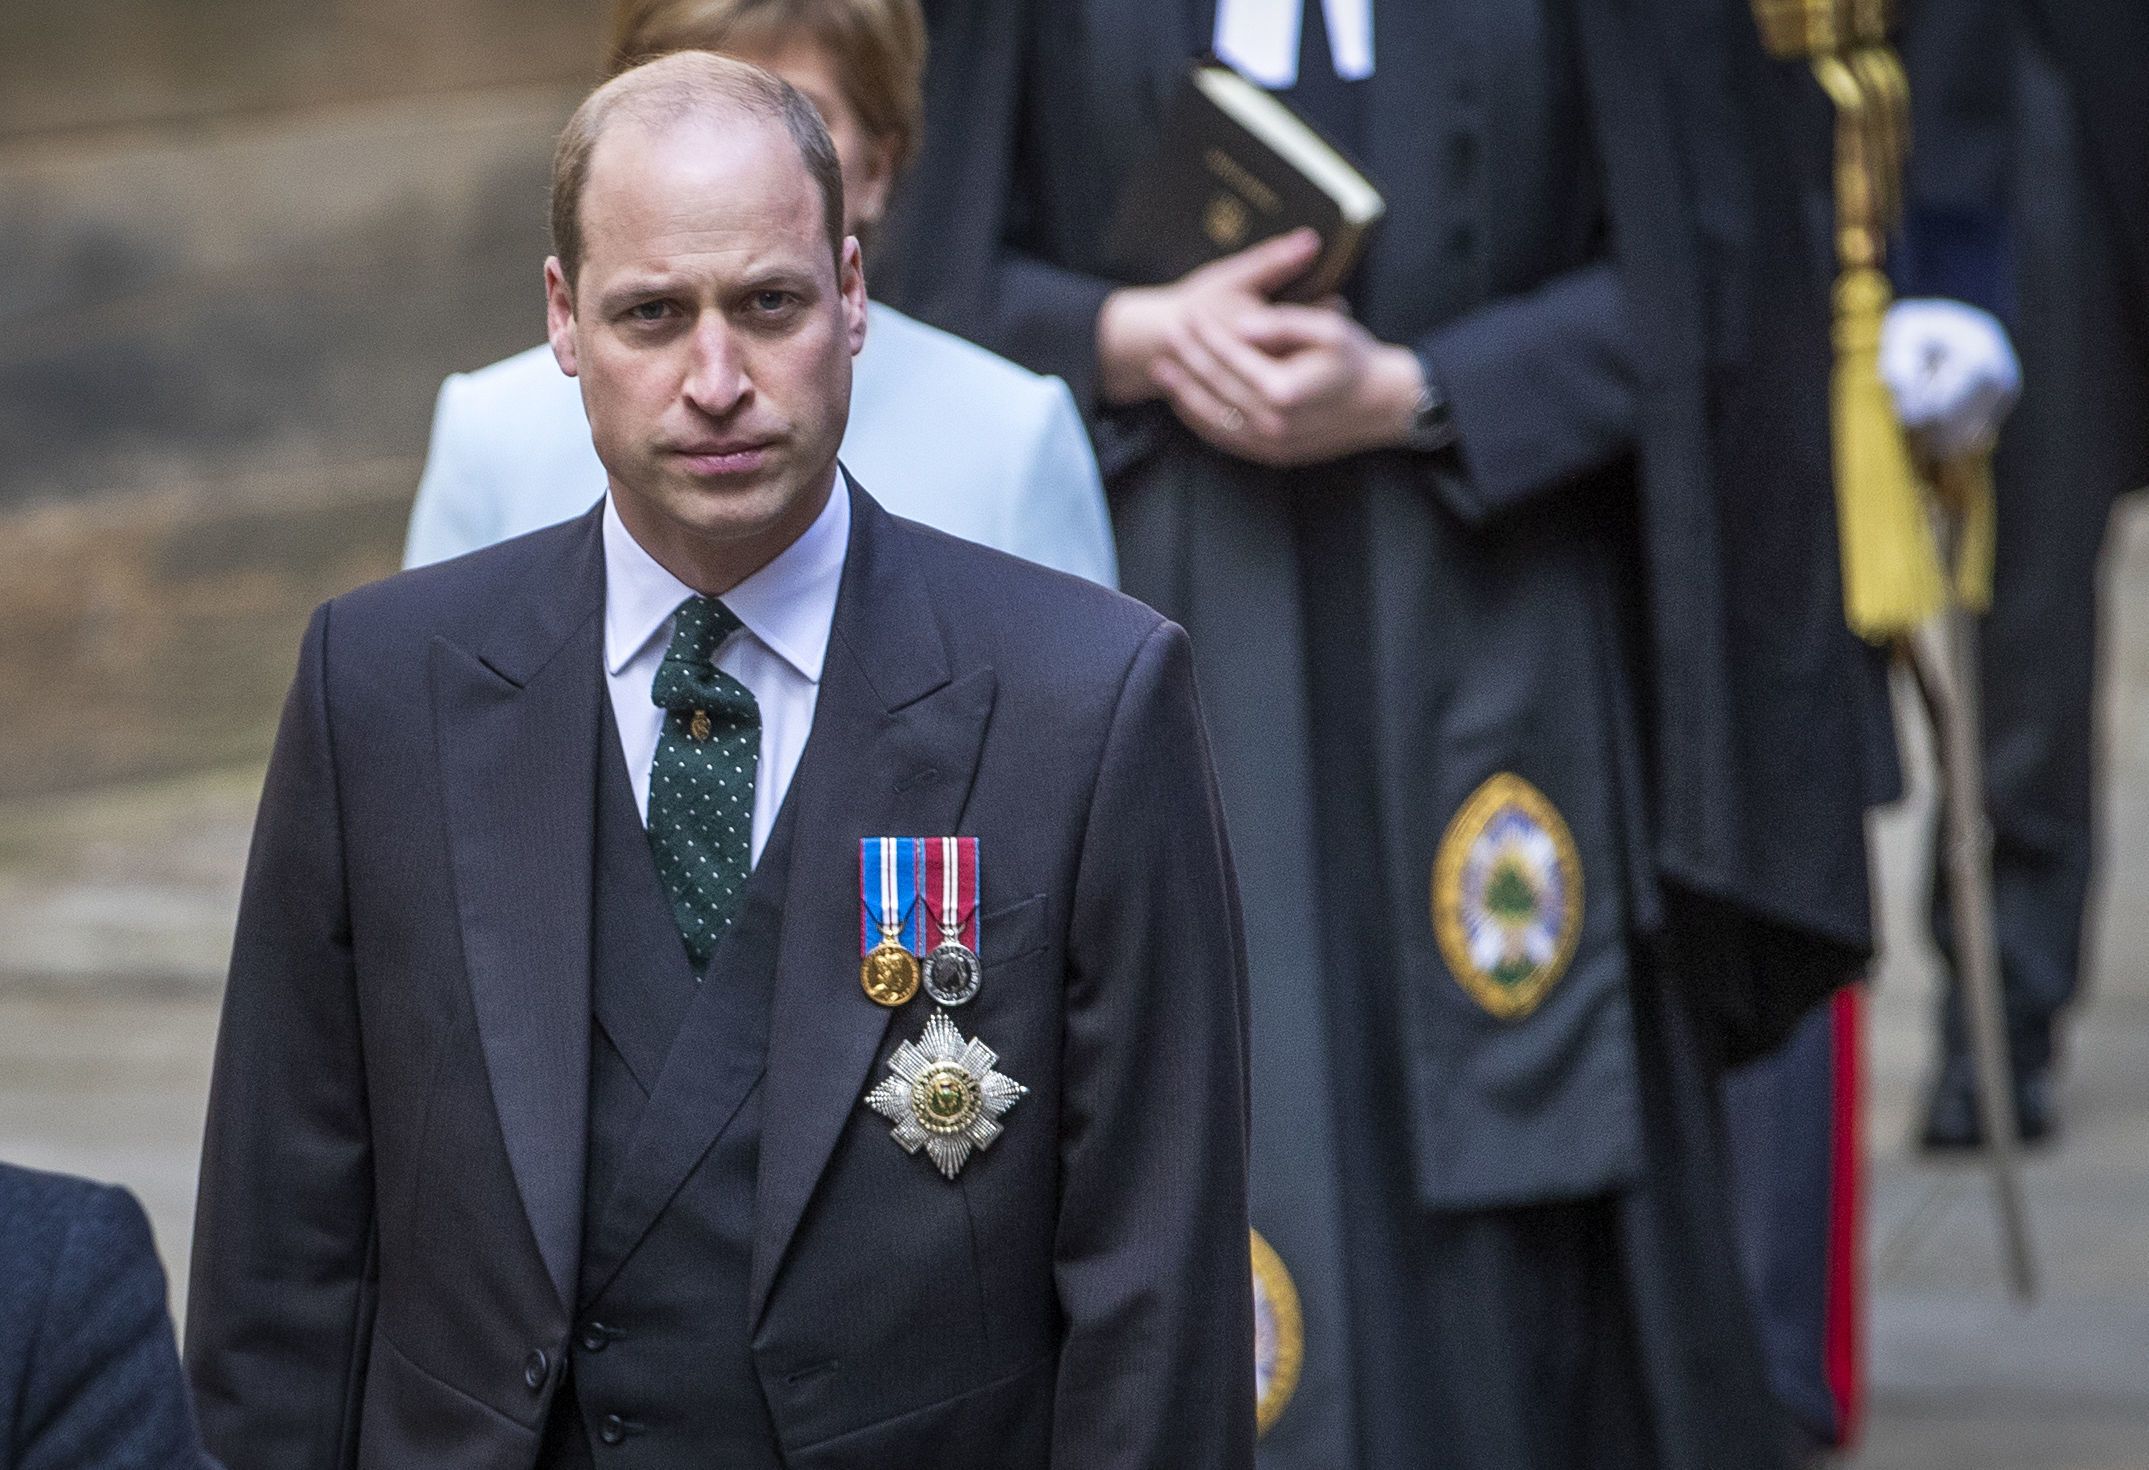 Prince William Was "Heavily Involved" in Stripping Prince Andrew of His Royal Titles